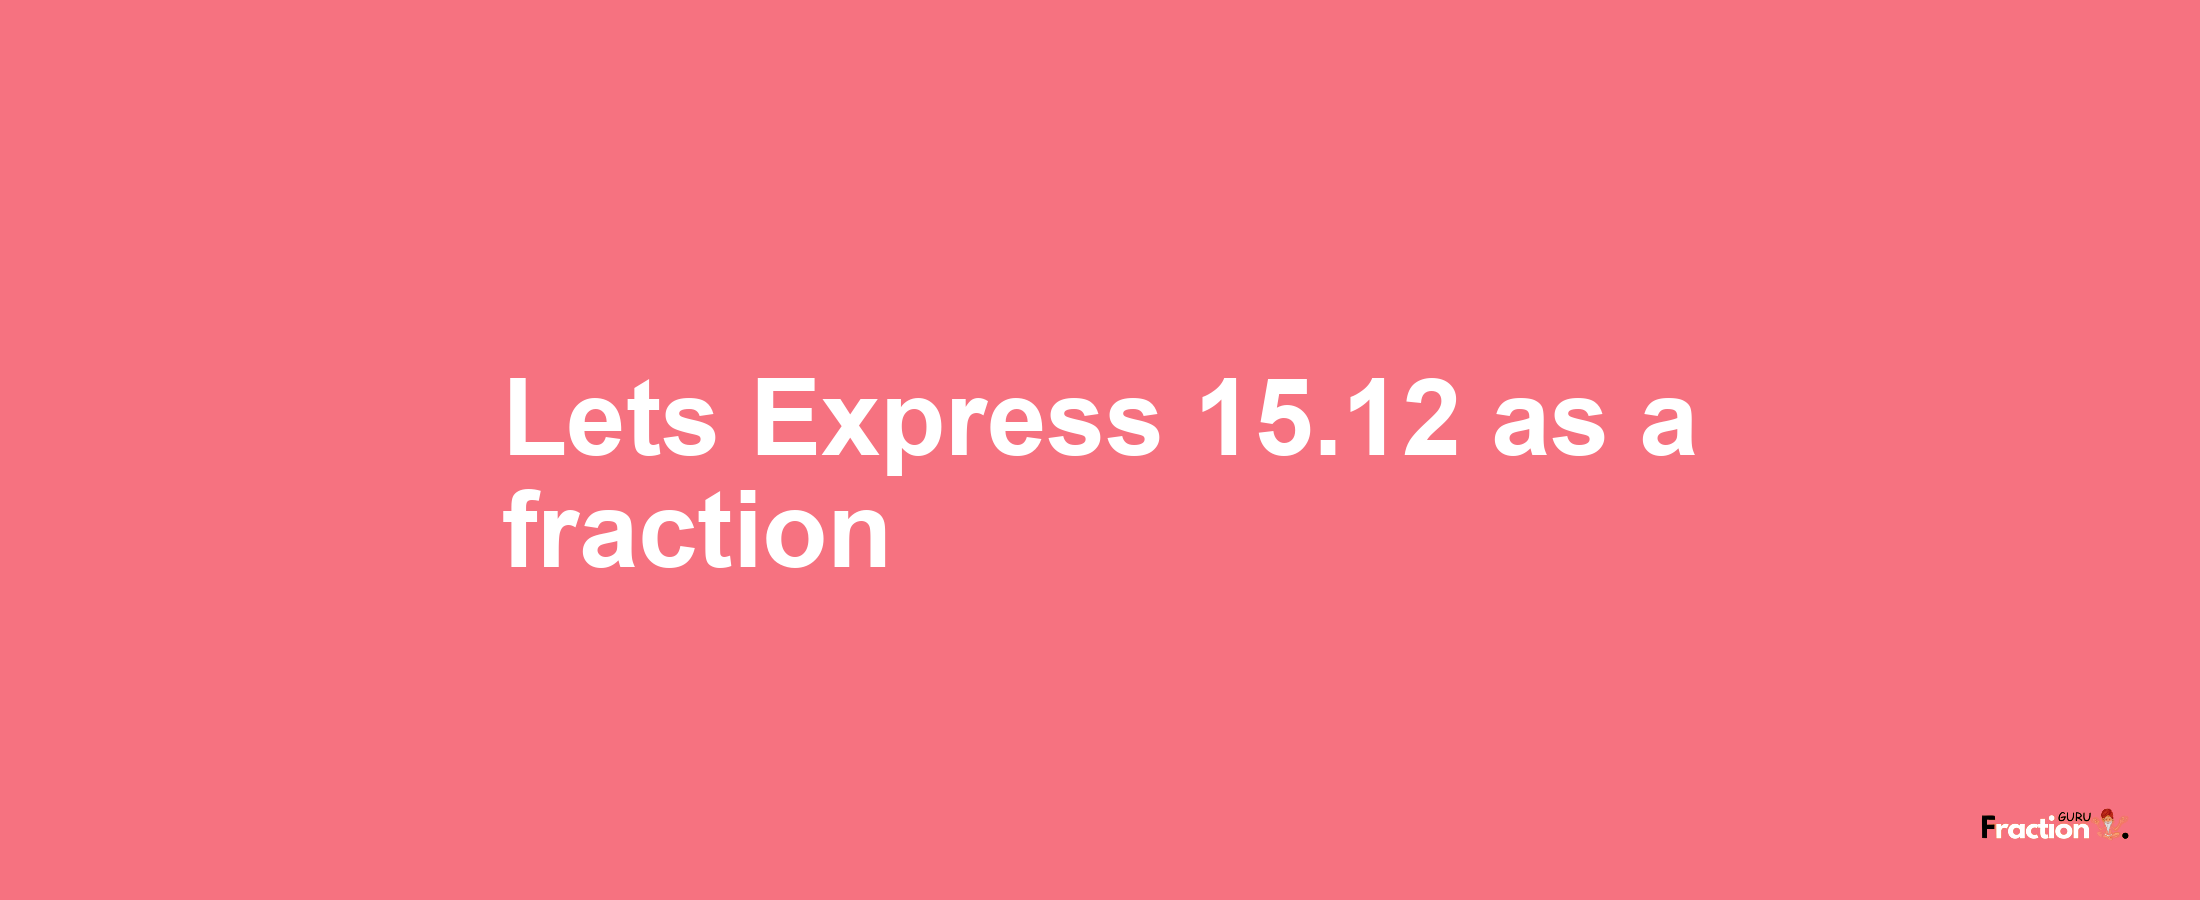 Lets Express 15.12 as afraction